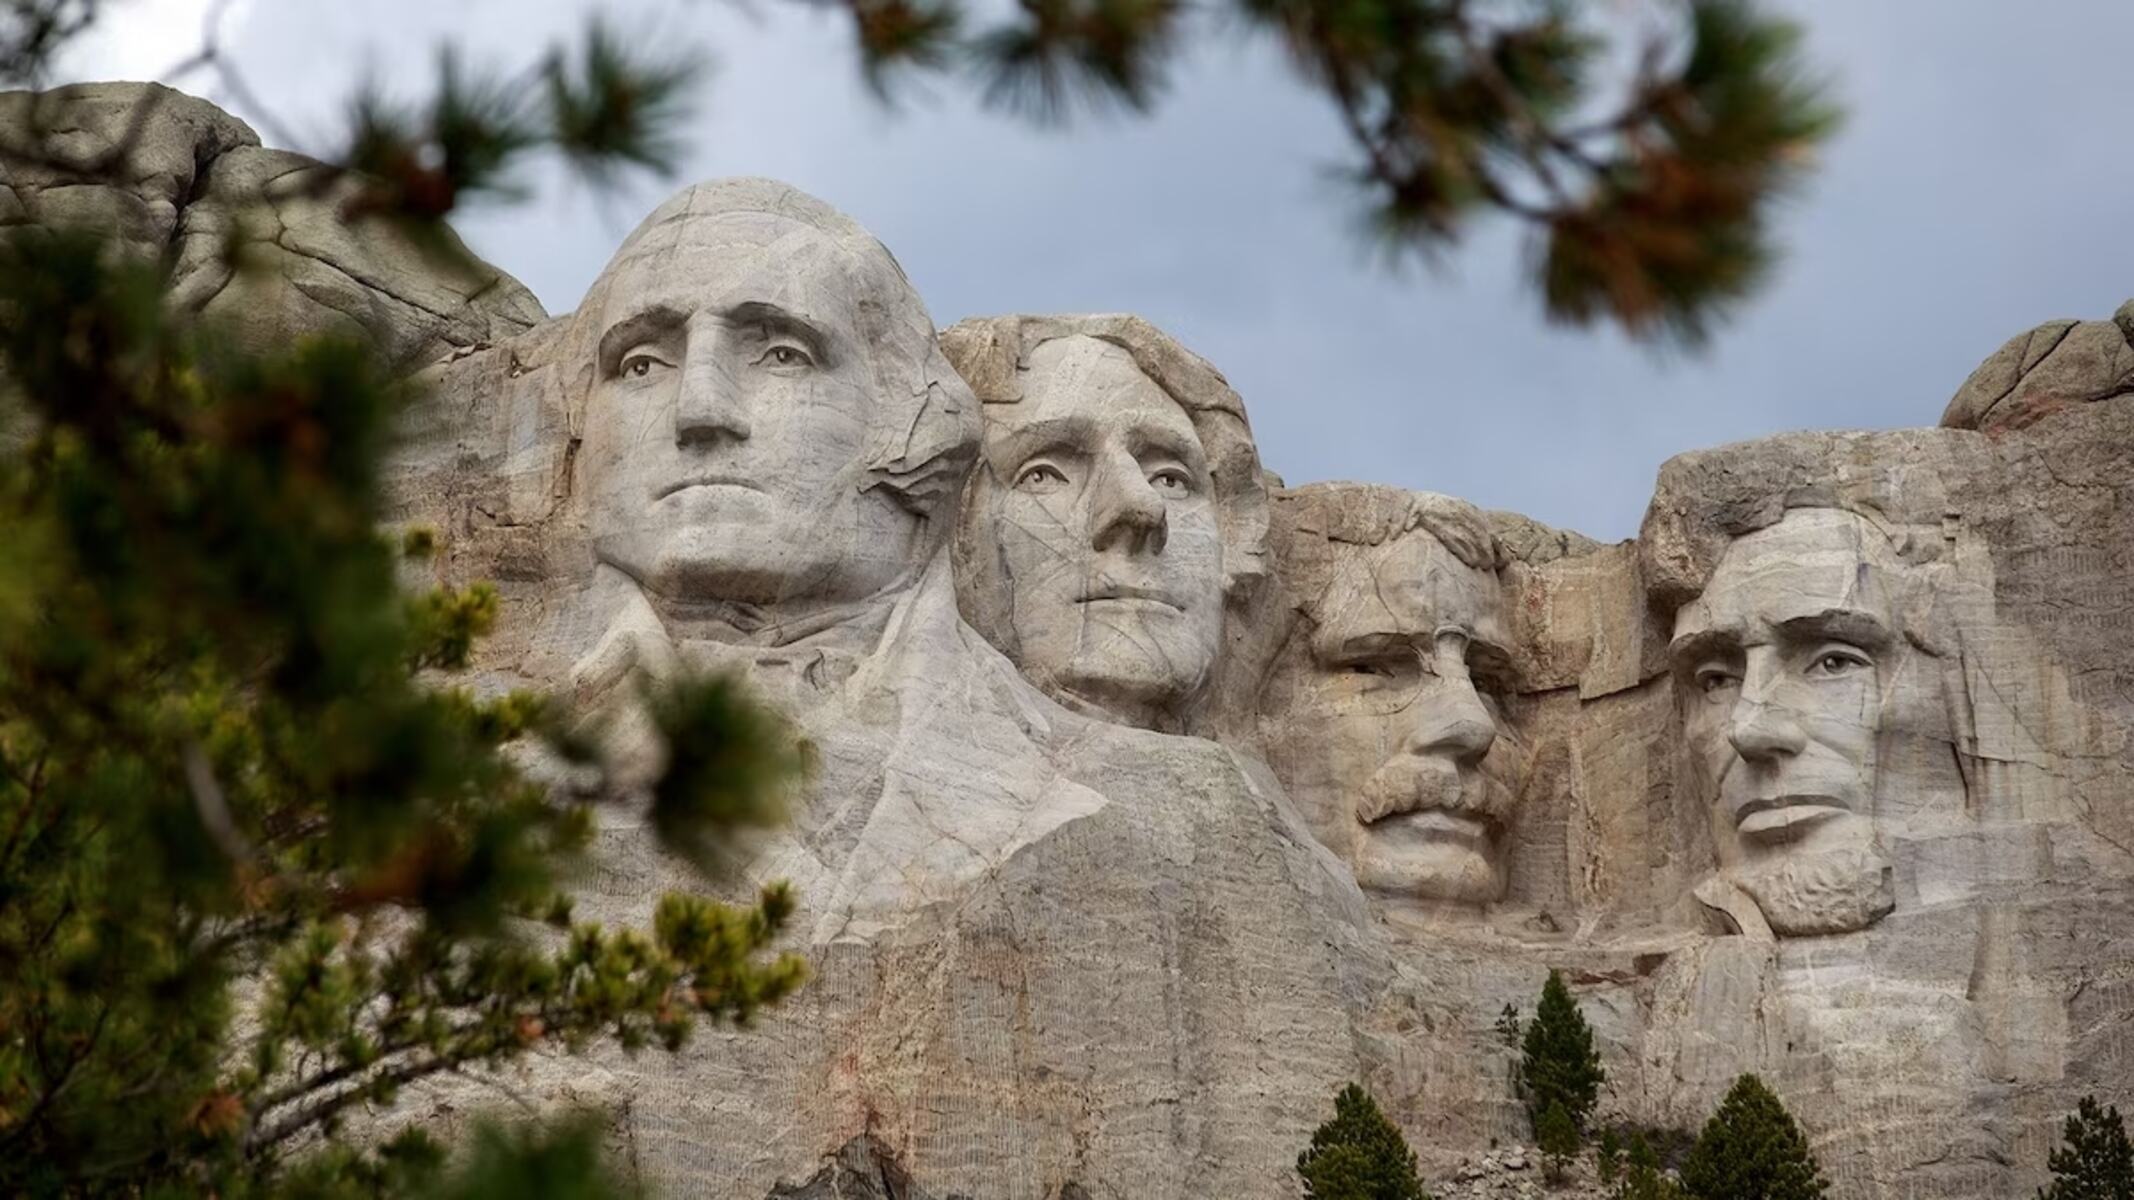 Whose Idea Was It To Create A Sculpture On Mount Rushmore?